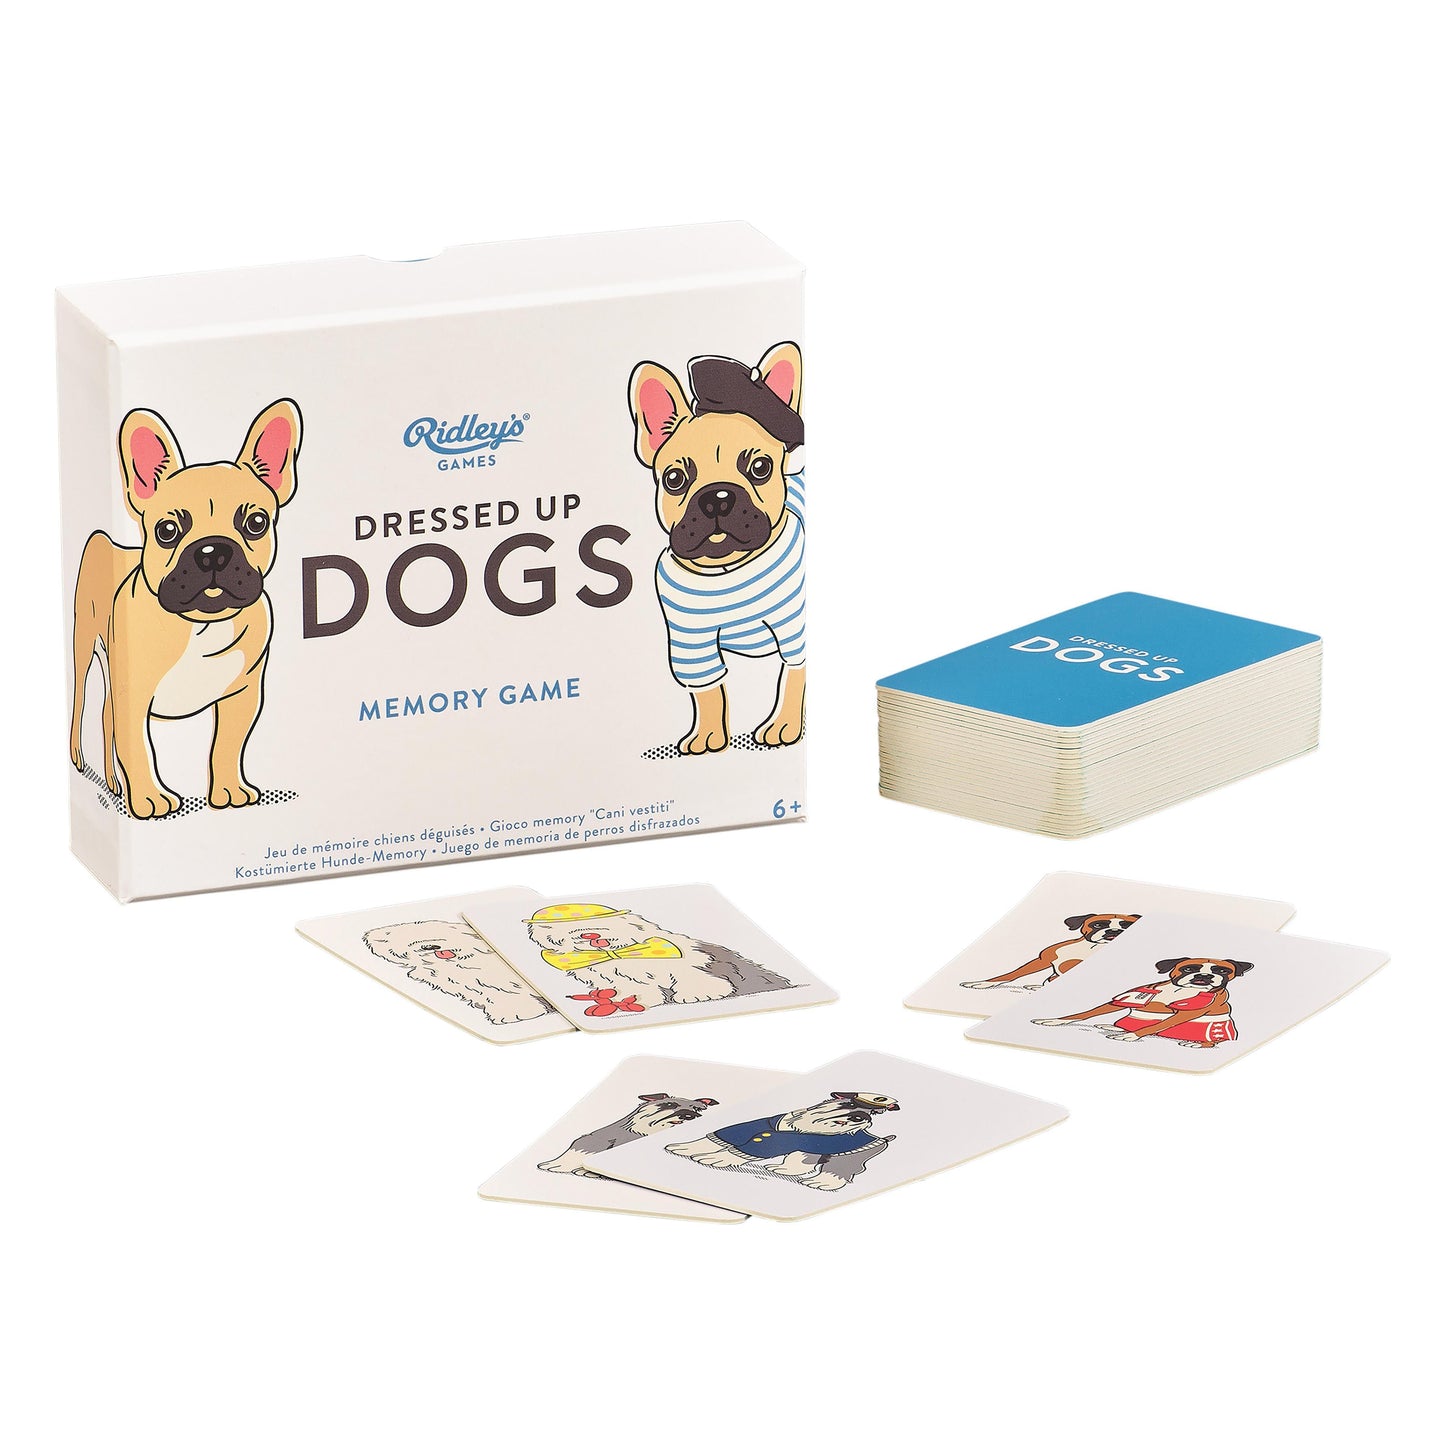 Dressed Up Dogs Memory Game - Gifts R Us